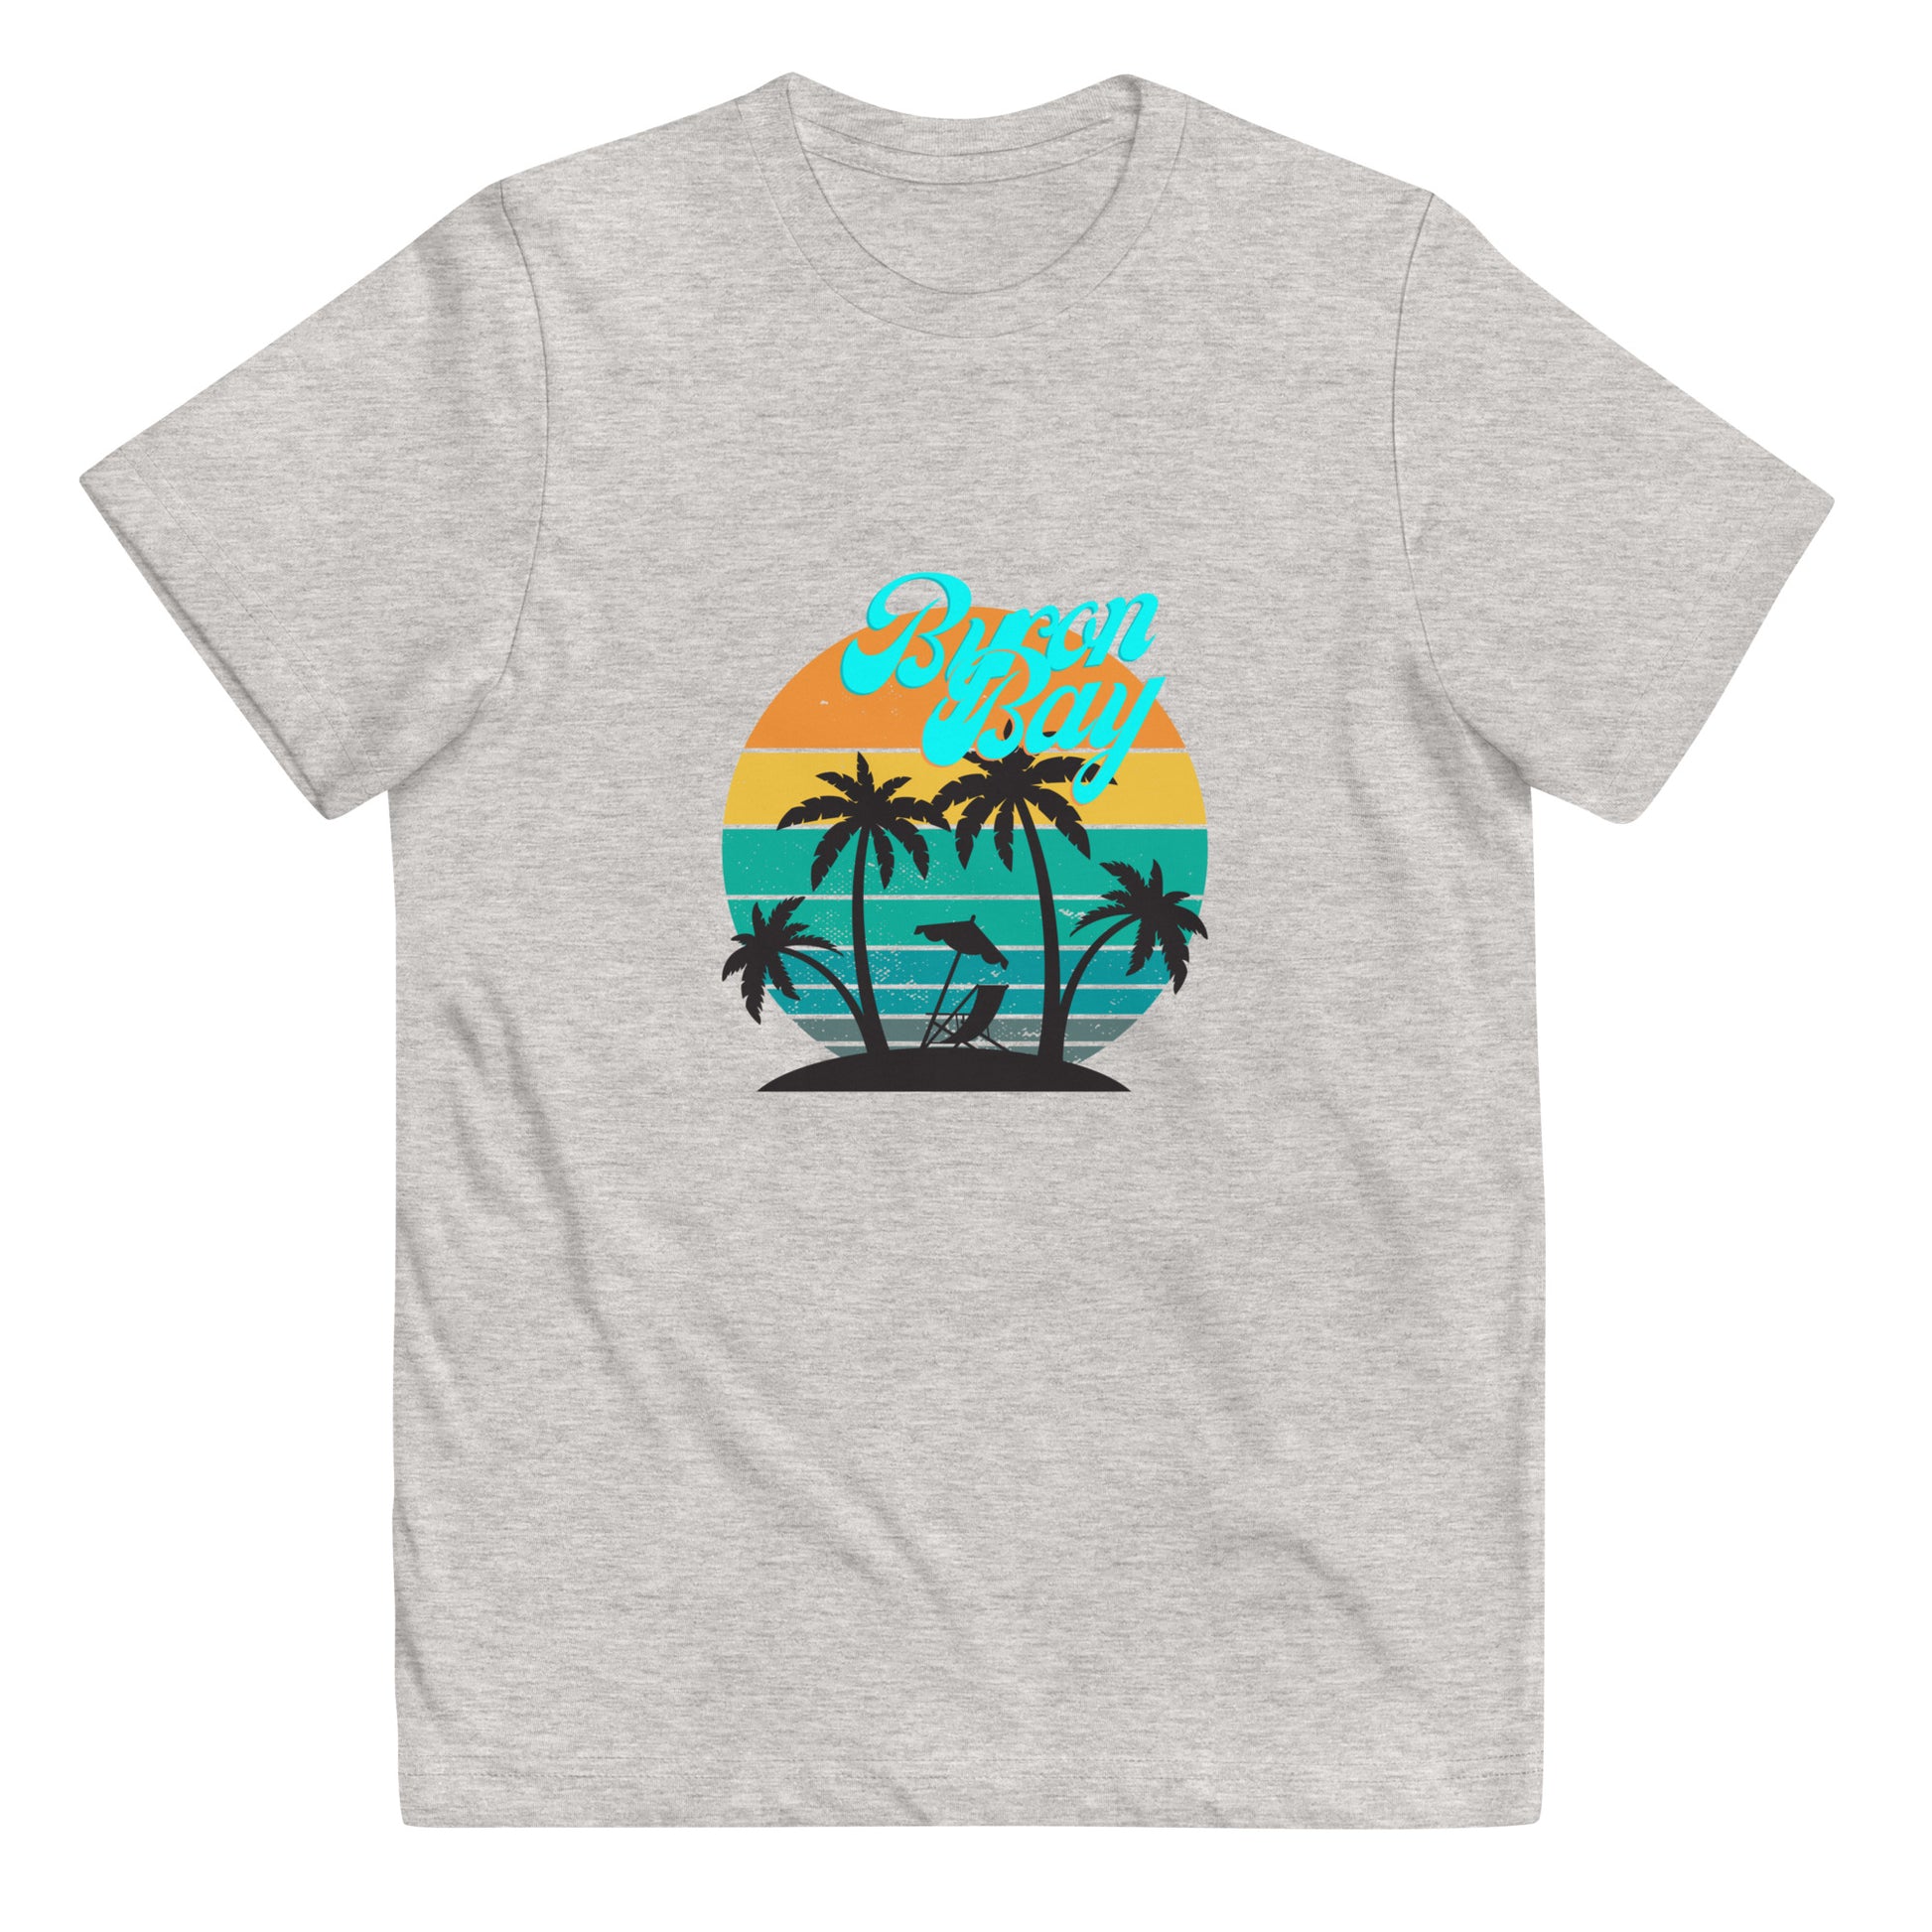  Kids T-Shirt - Natural / Heather colour - Front flat lay view - Byron Bay design on front - Genuine Byron Bay Merchandise | Produced by Go Sea Kayak Byron Bay 